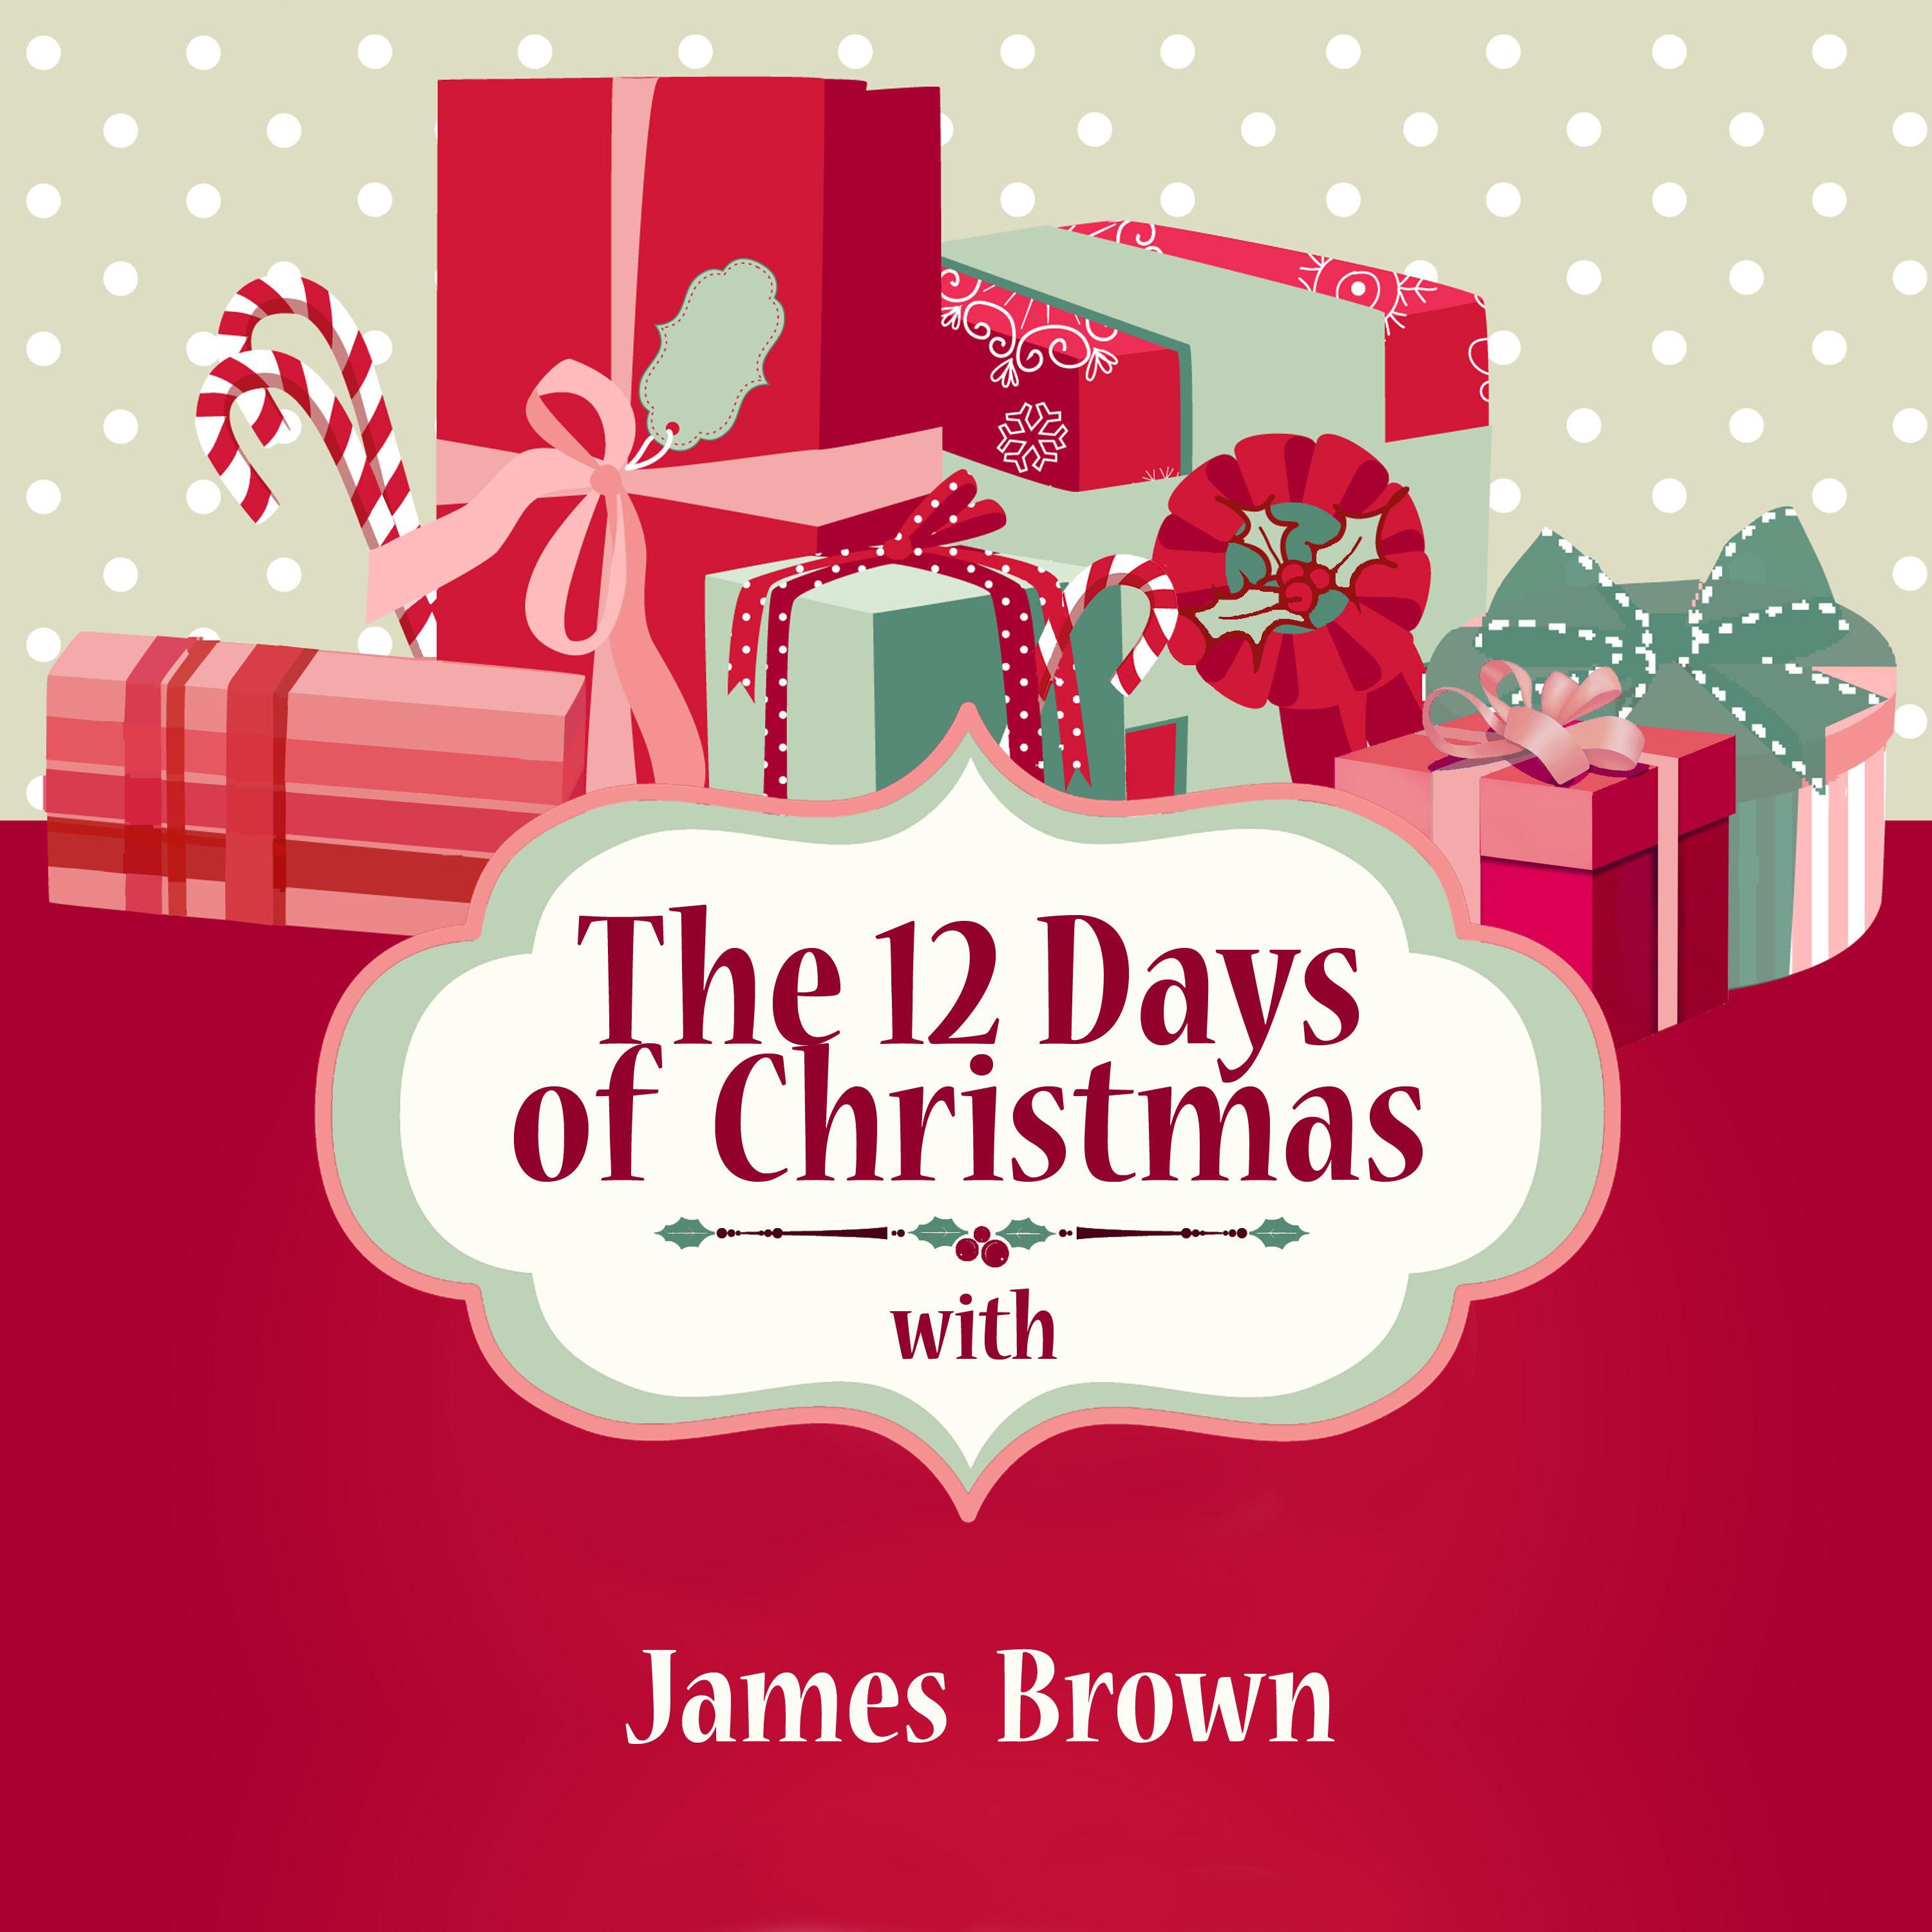 The 12 Days of Christmas with James Brown